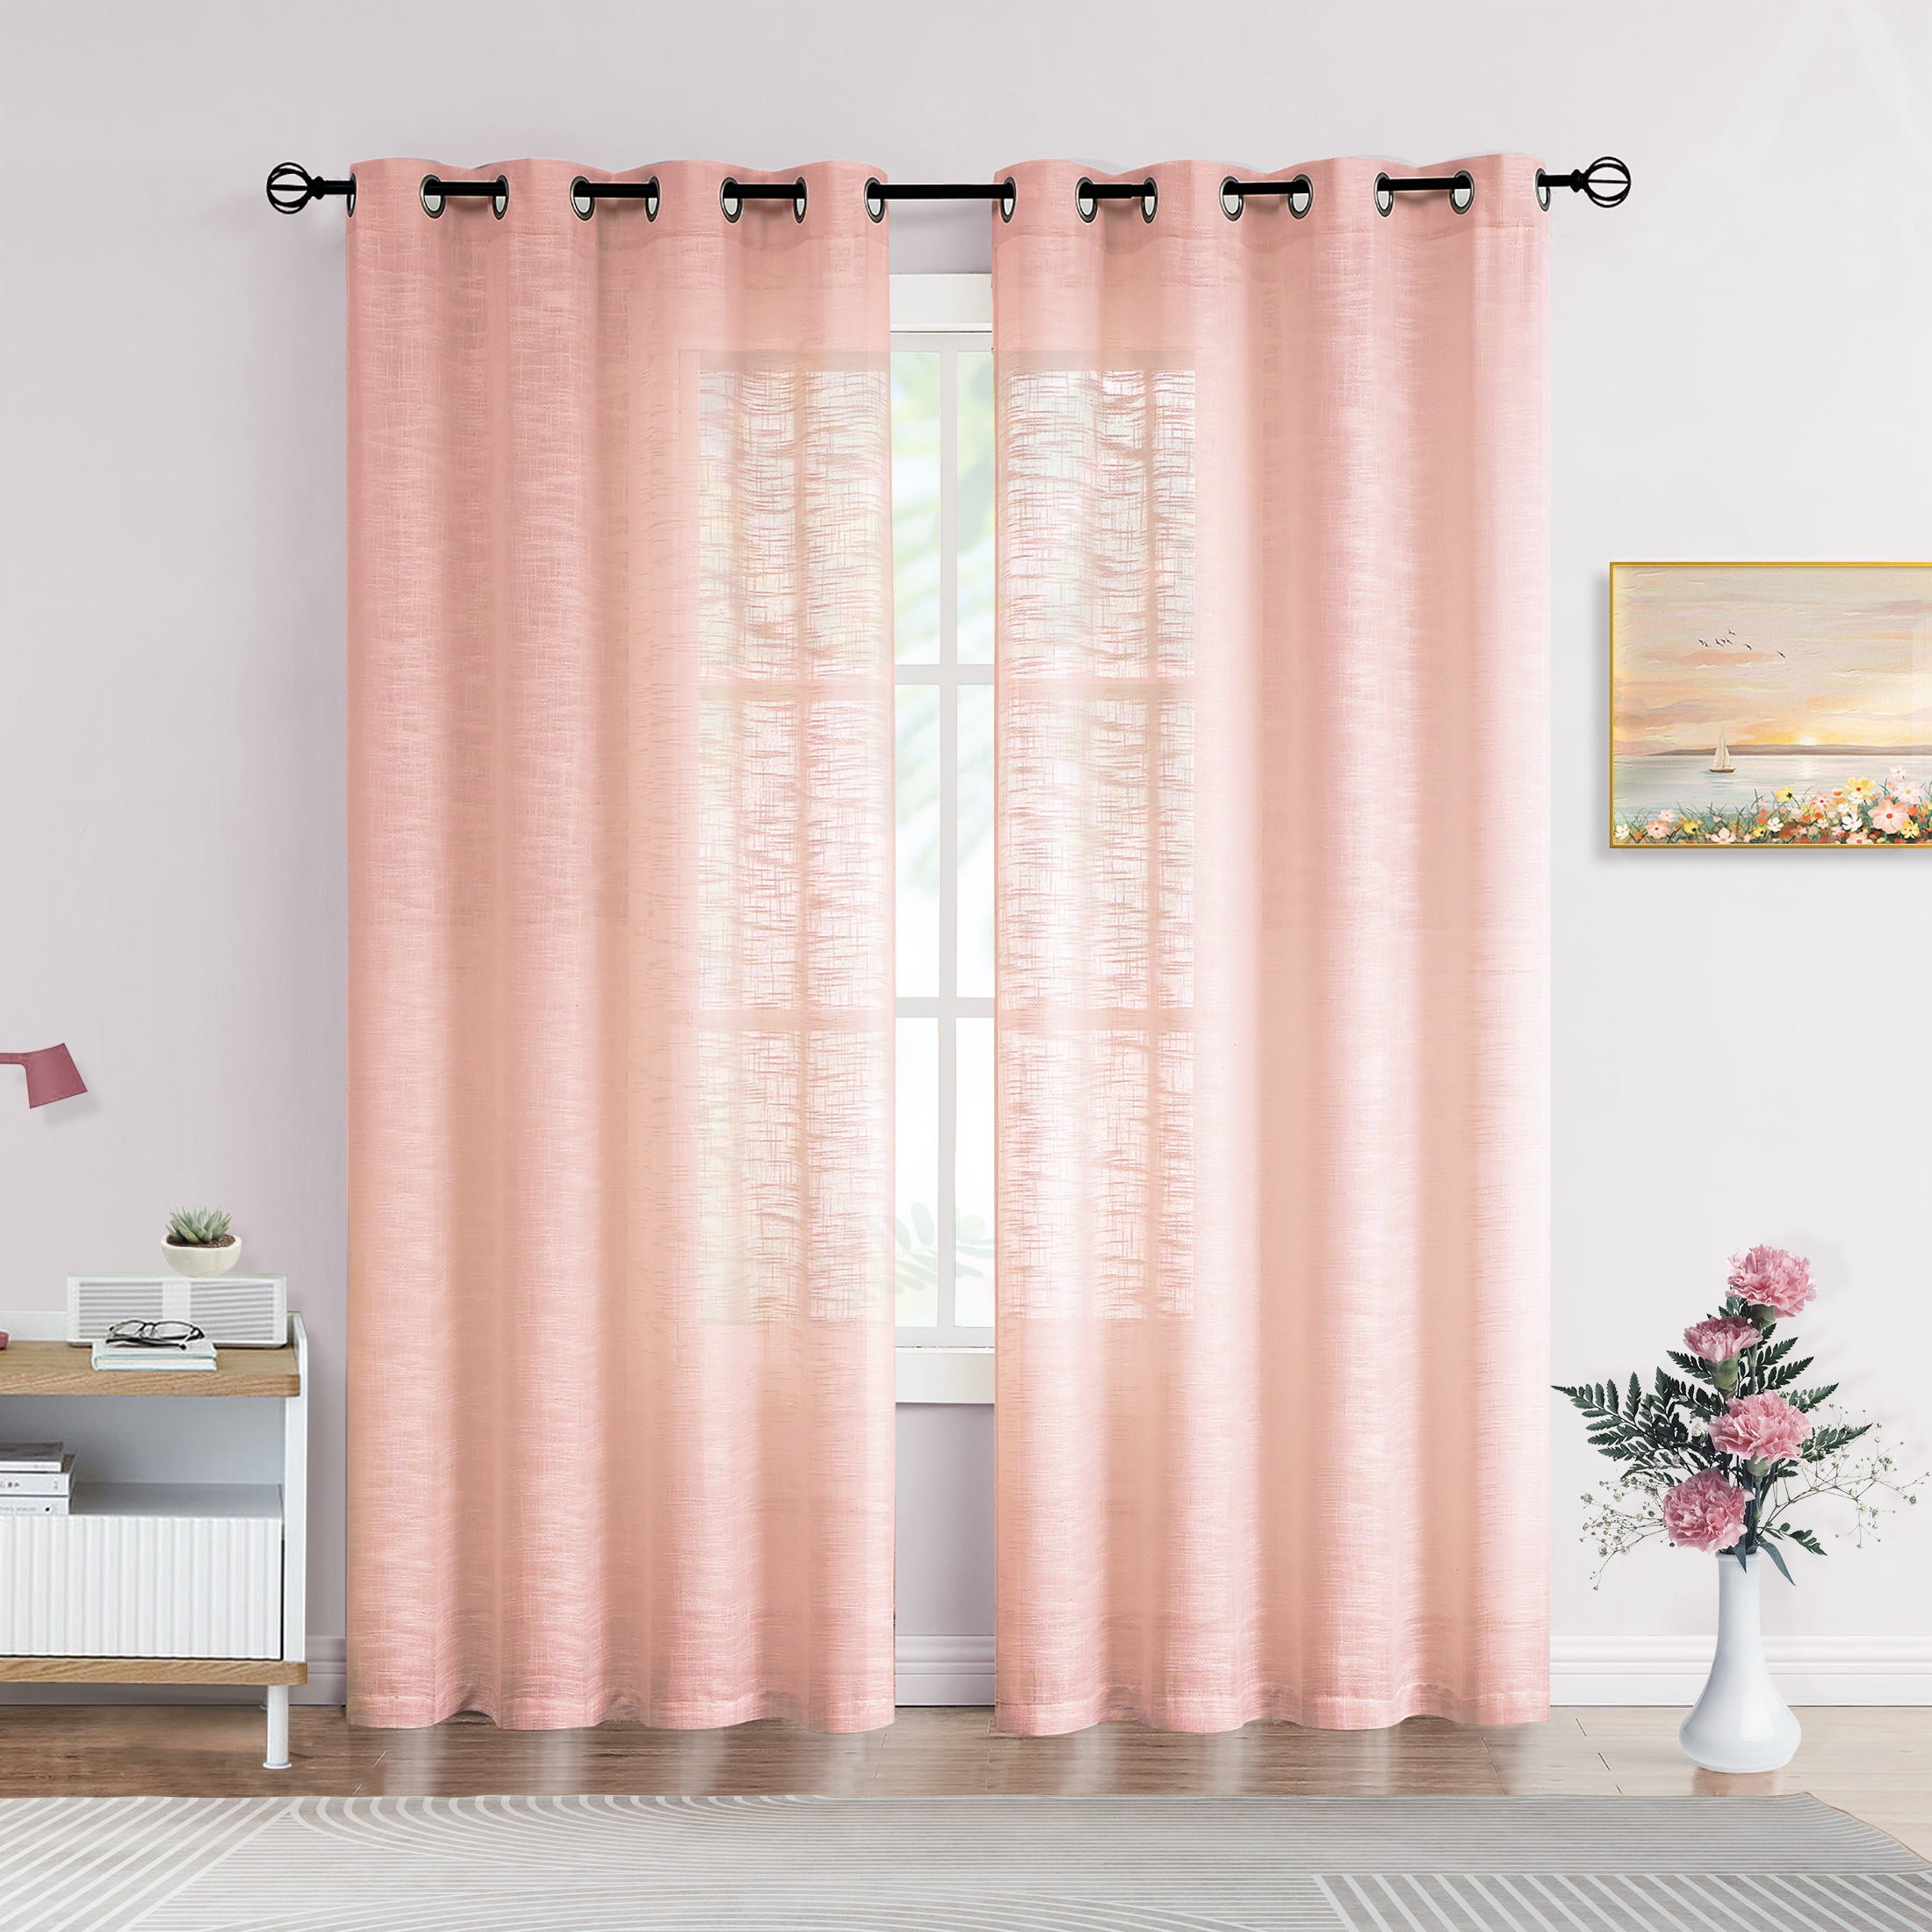 Decoultimatex Pink Sheer Curtains 63-inch Long Linen Textured Window ...